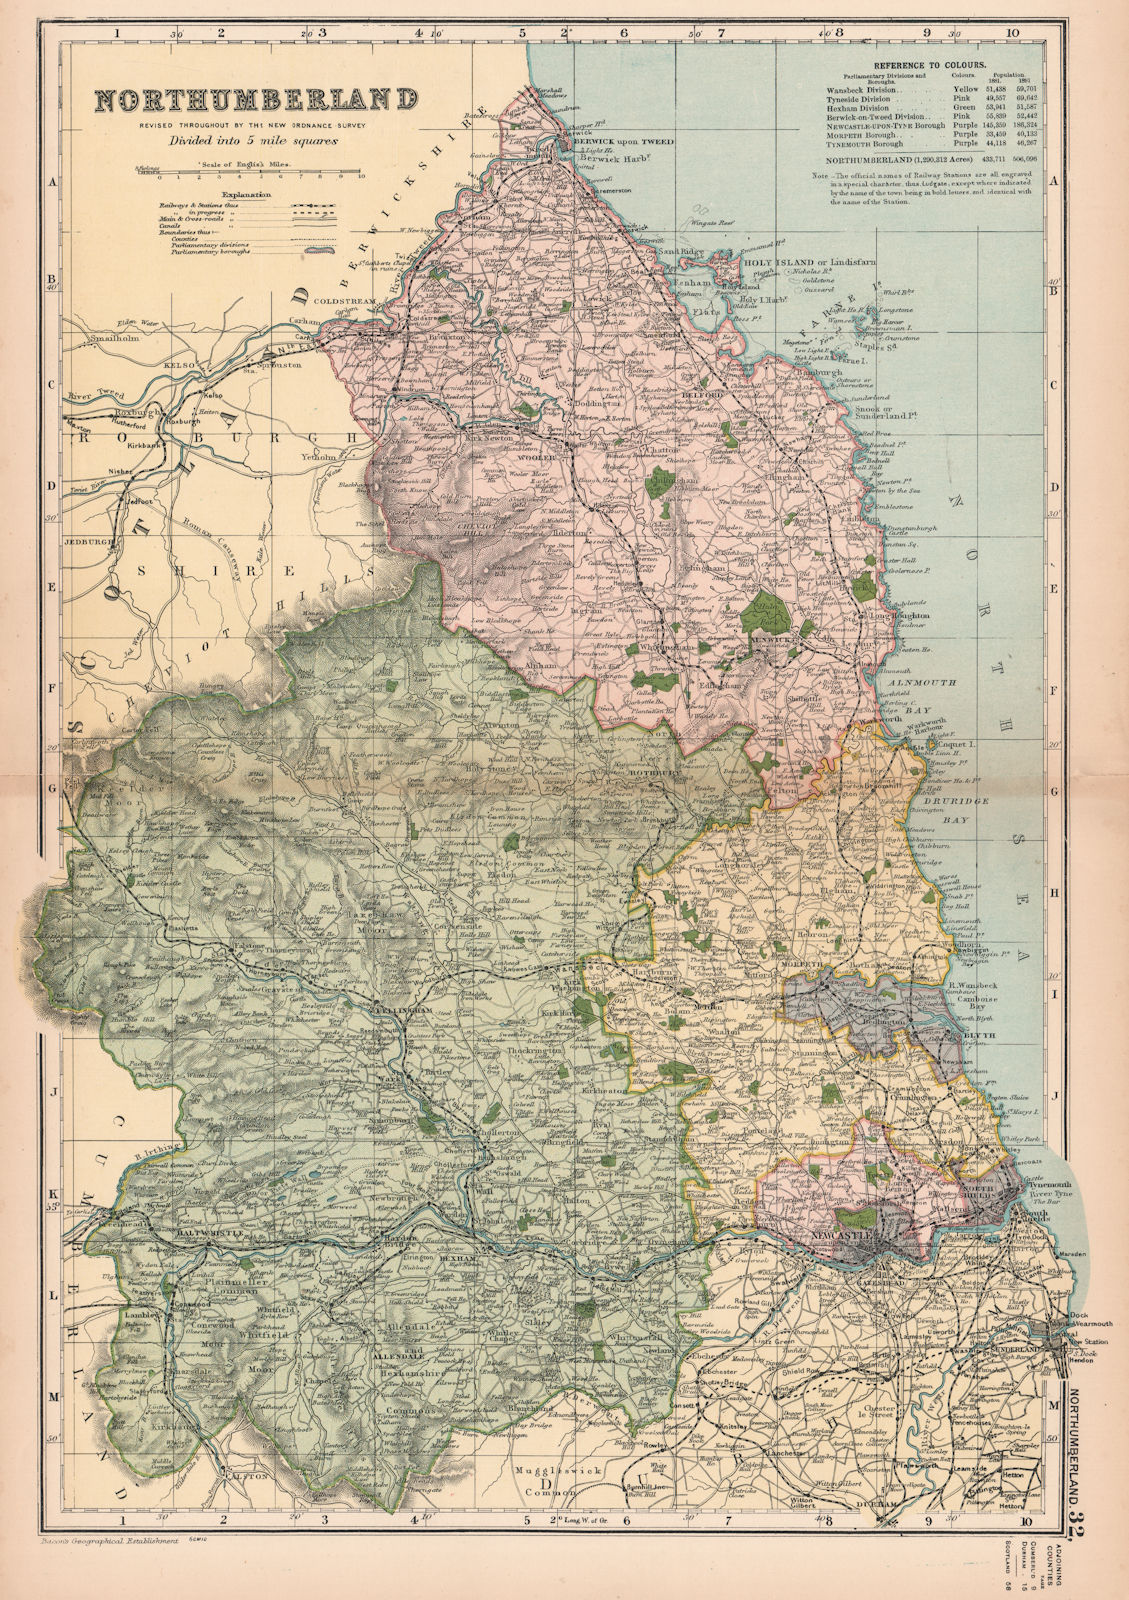 Associate Product NORTHUMBERLAND. Showing Parliamentary divisions,boroughs & parks.BACON 1901 map